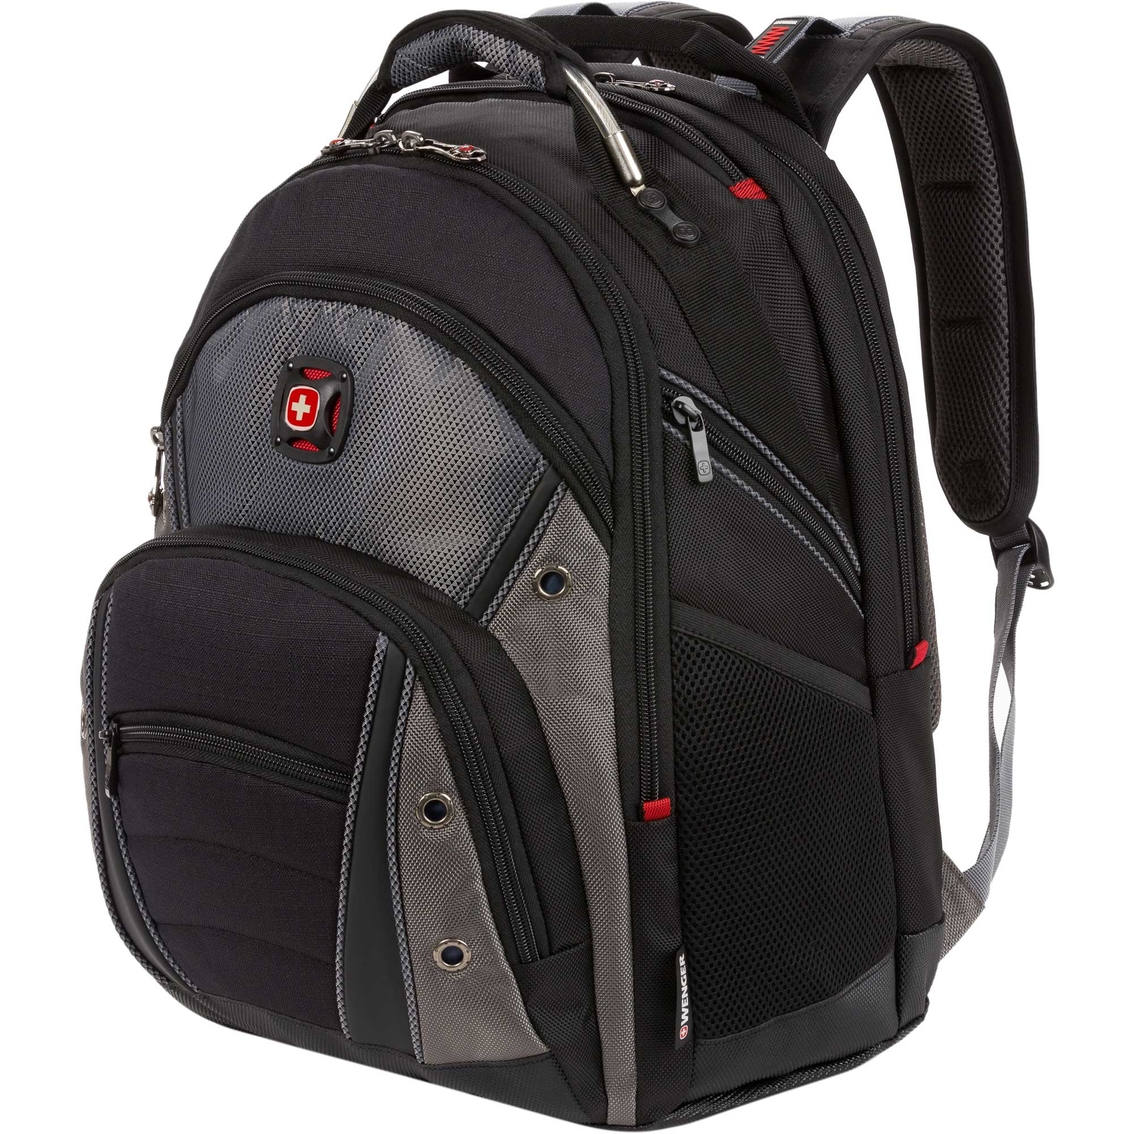 Swissgear Wenger 5203 Synergy Laptop Backpack | Computer Bags & Cases ...